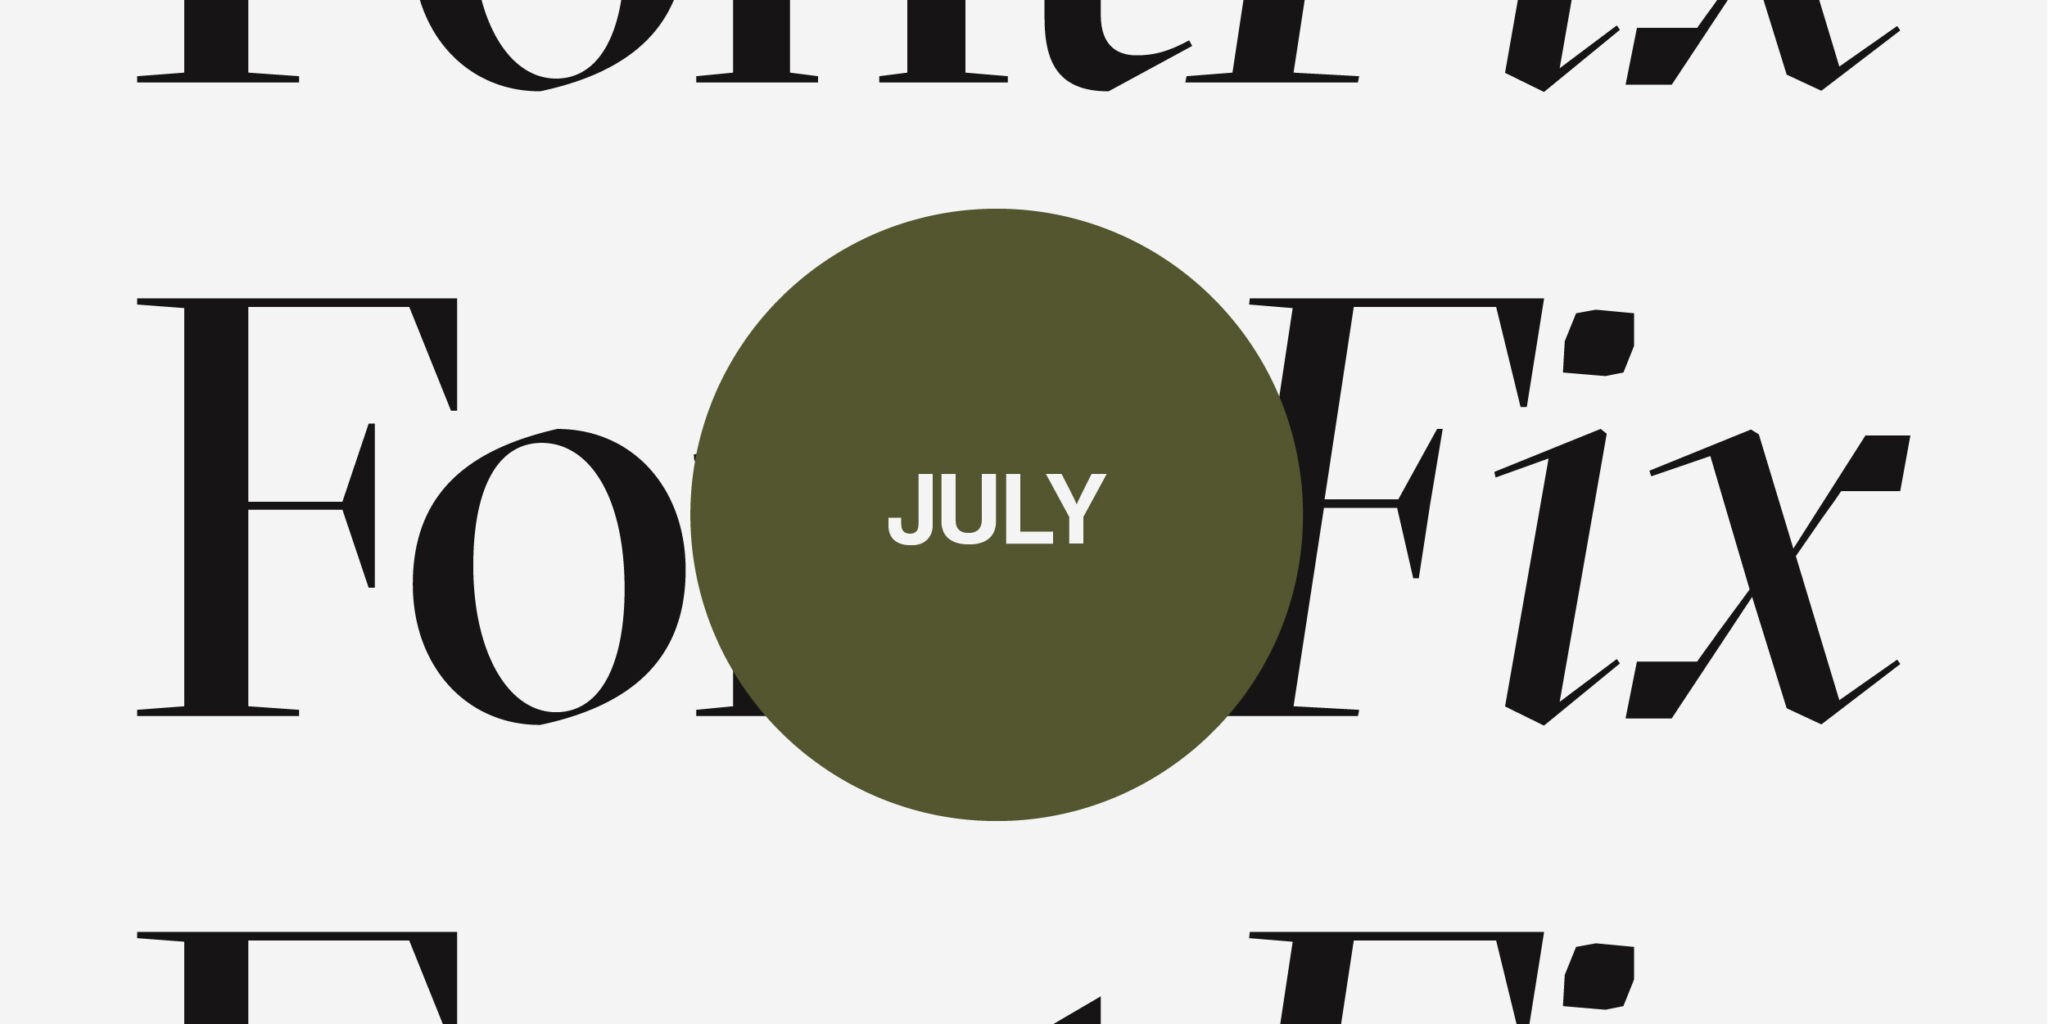 Title image for the blog post 'Your font fix for July'. It says three times Font Fix in the background and on a circle at the front 'July'